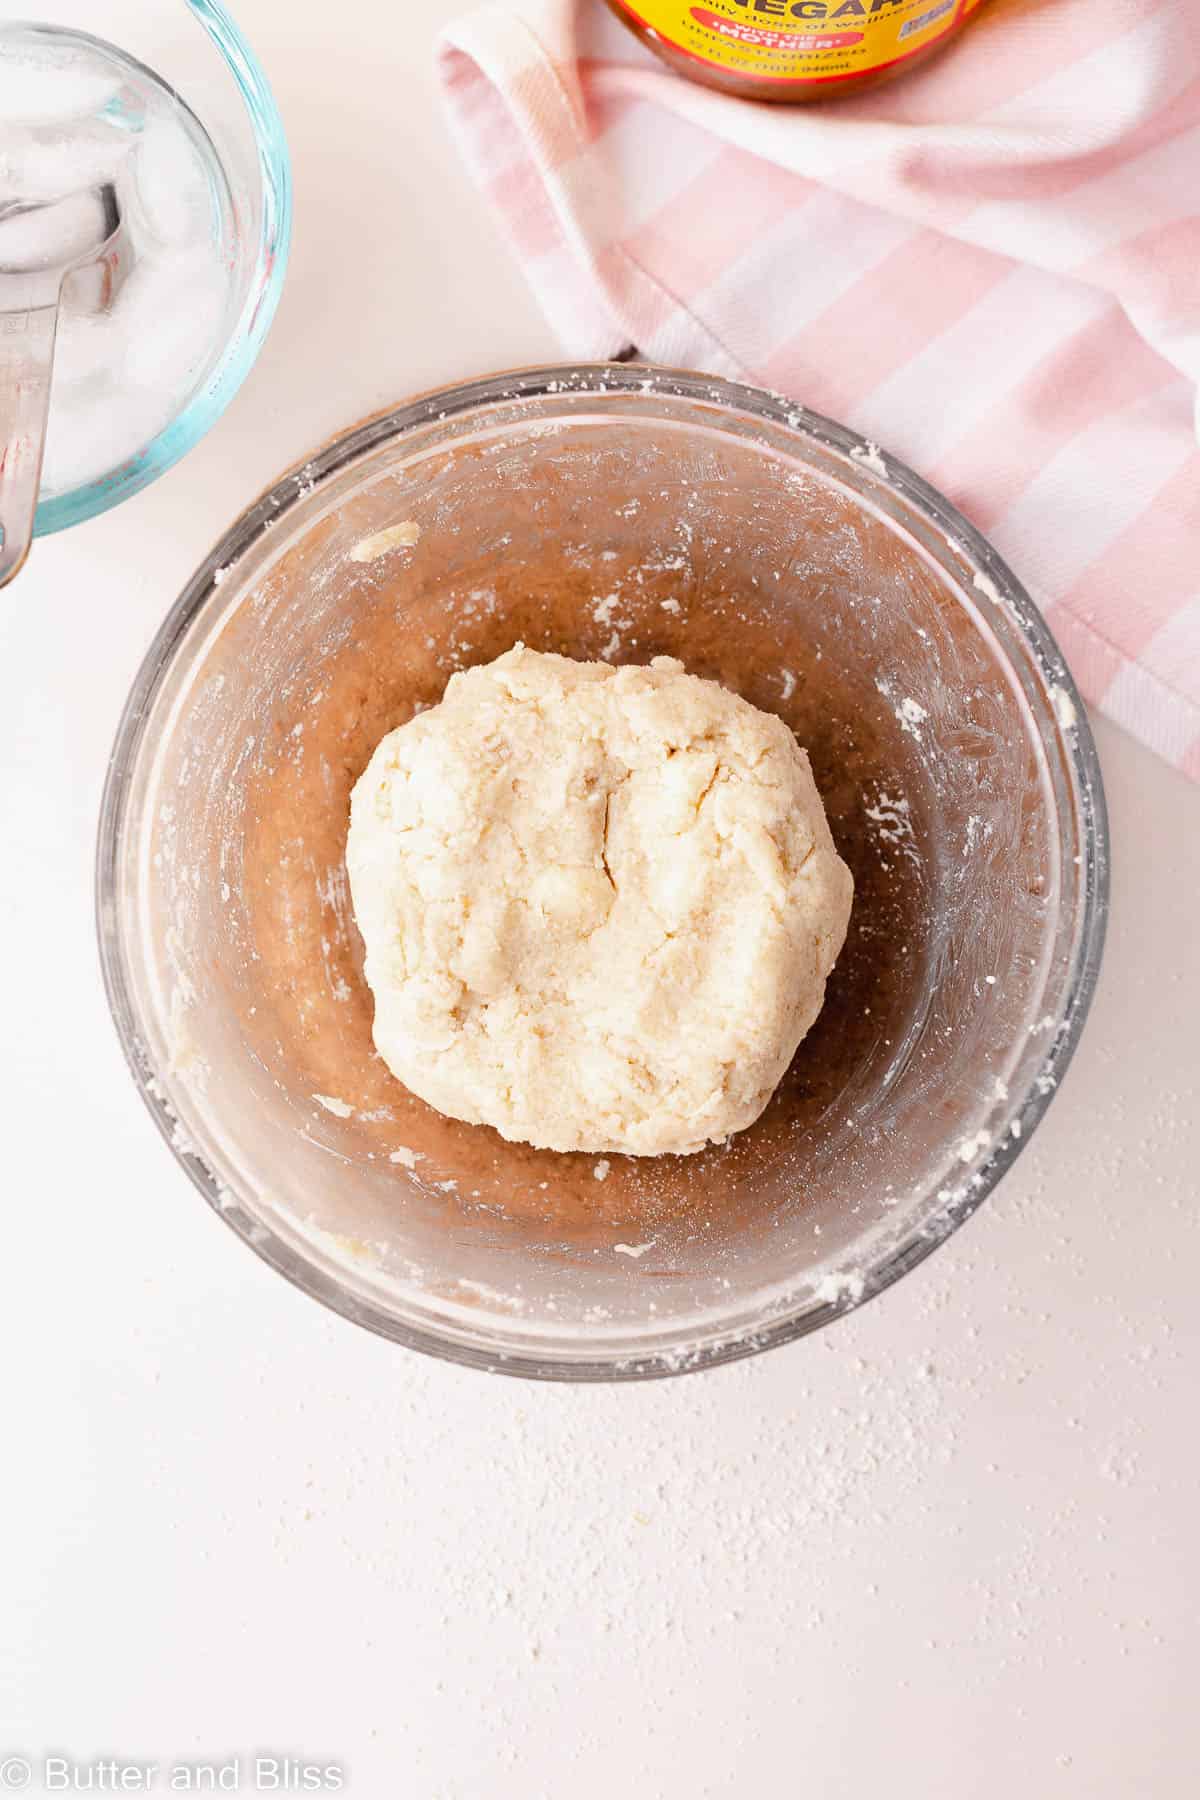 Gluten free pie crust dough formed into a ball in a glass bowl.